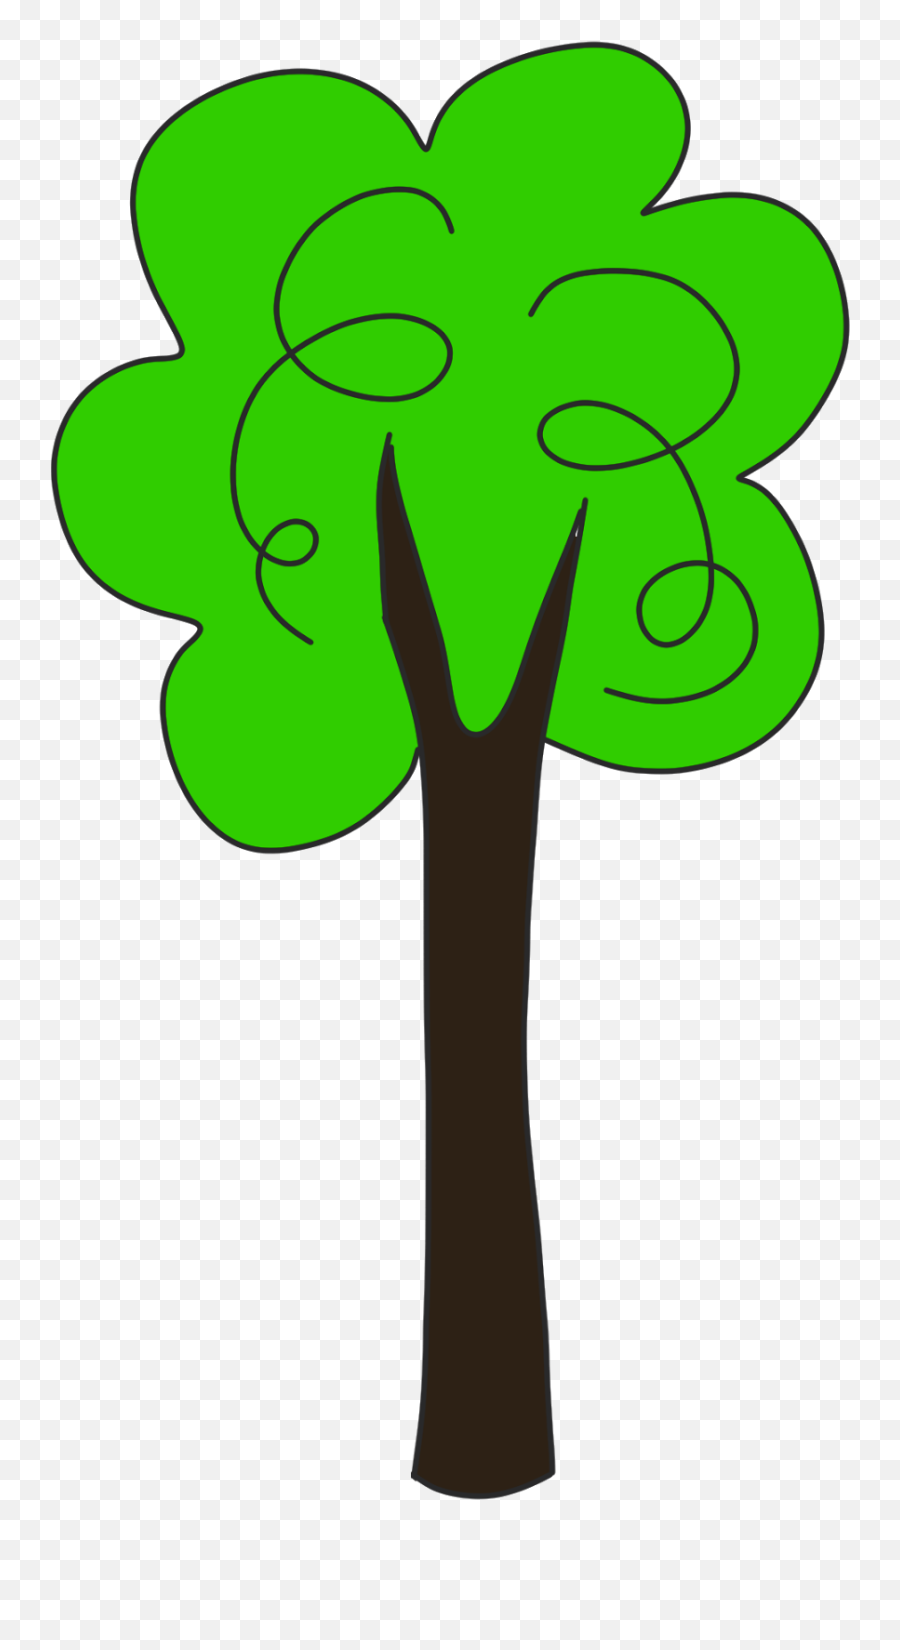 Tall Cliparts Png Images - Tall Tree Clipart Free Emoji,Tall Clipart